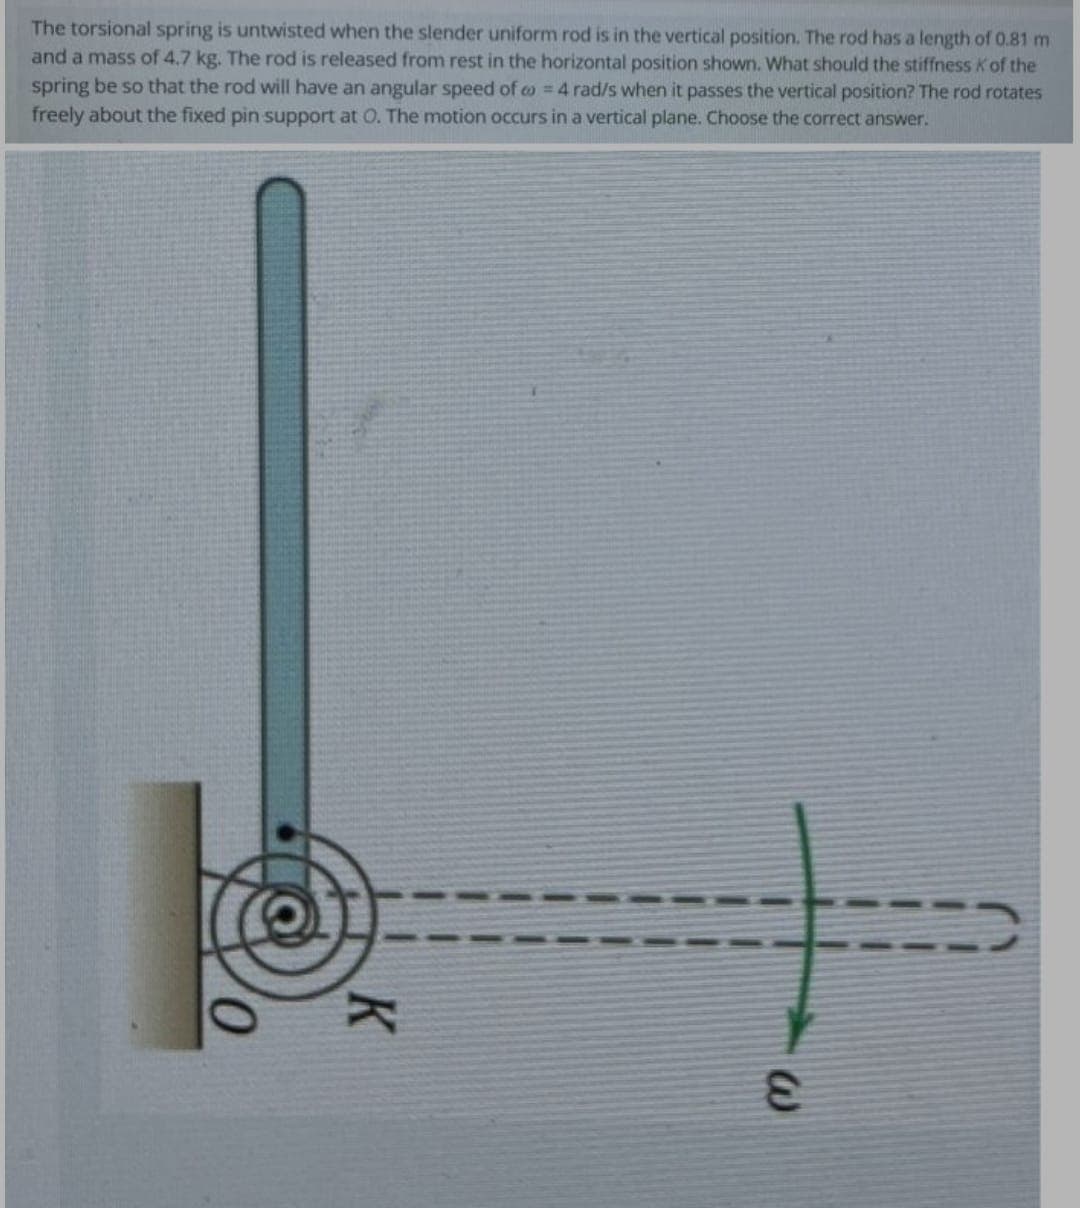 The torsional spring is untwisted when the slender uniform rod is in the vertical position. The rod has a length of 0.81 m
and a mass of 4.7 kg. The rod is released from rest in the horizontal position shown. What should the stiffness Kof the
spring be so that the rod will have an angular speed of o = 4 rad/s when it passes the vertical position? The rod rotates
freely about the fixed pin support at O. The motion occurs in a vertical plane. Choose the correct answer.
